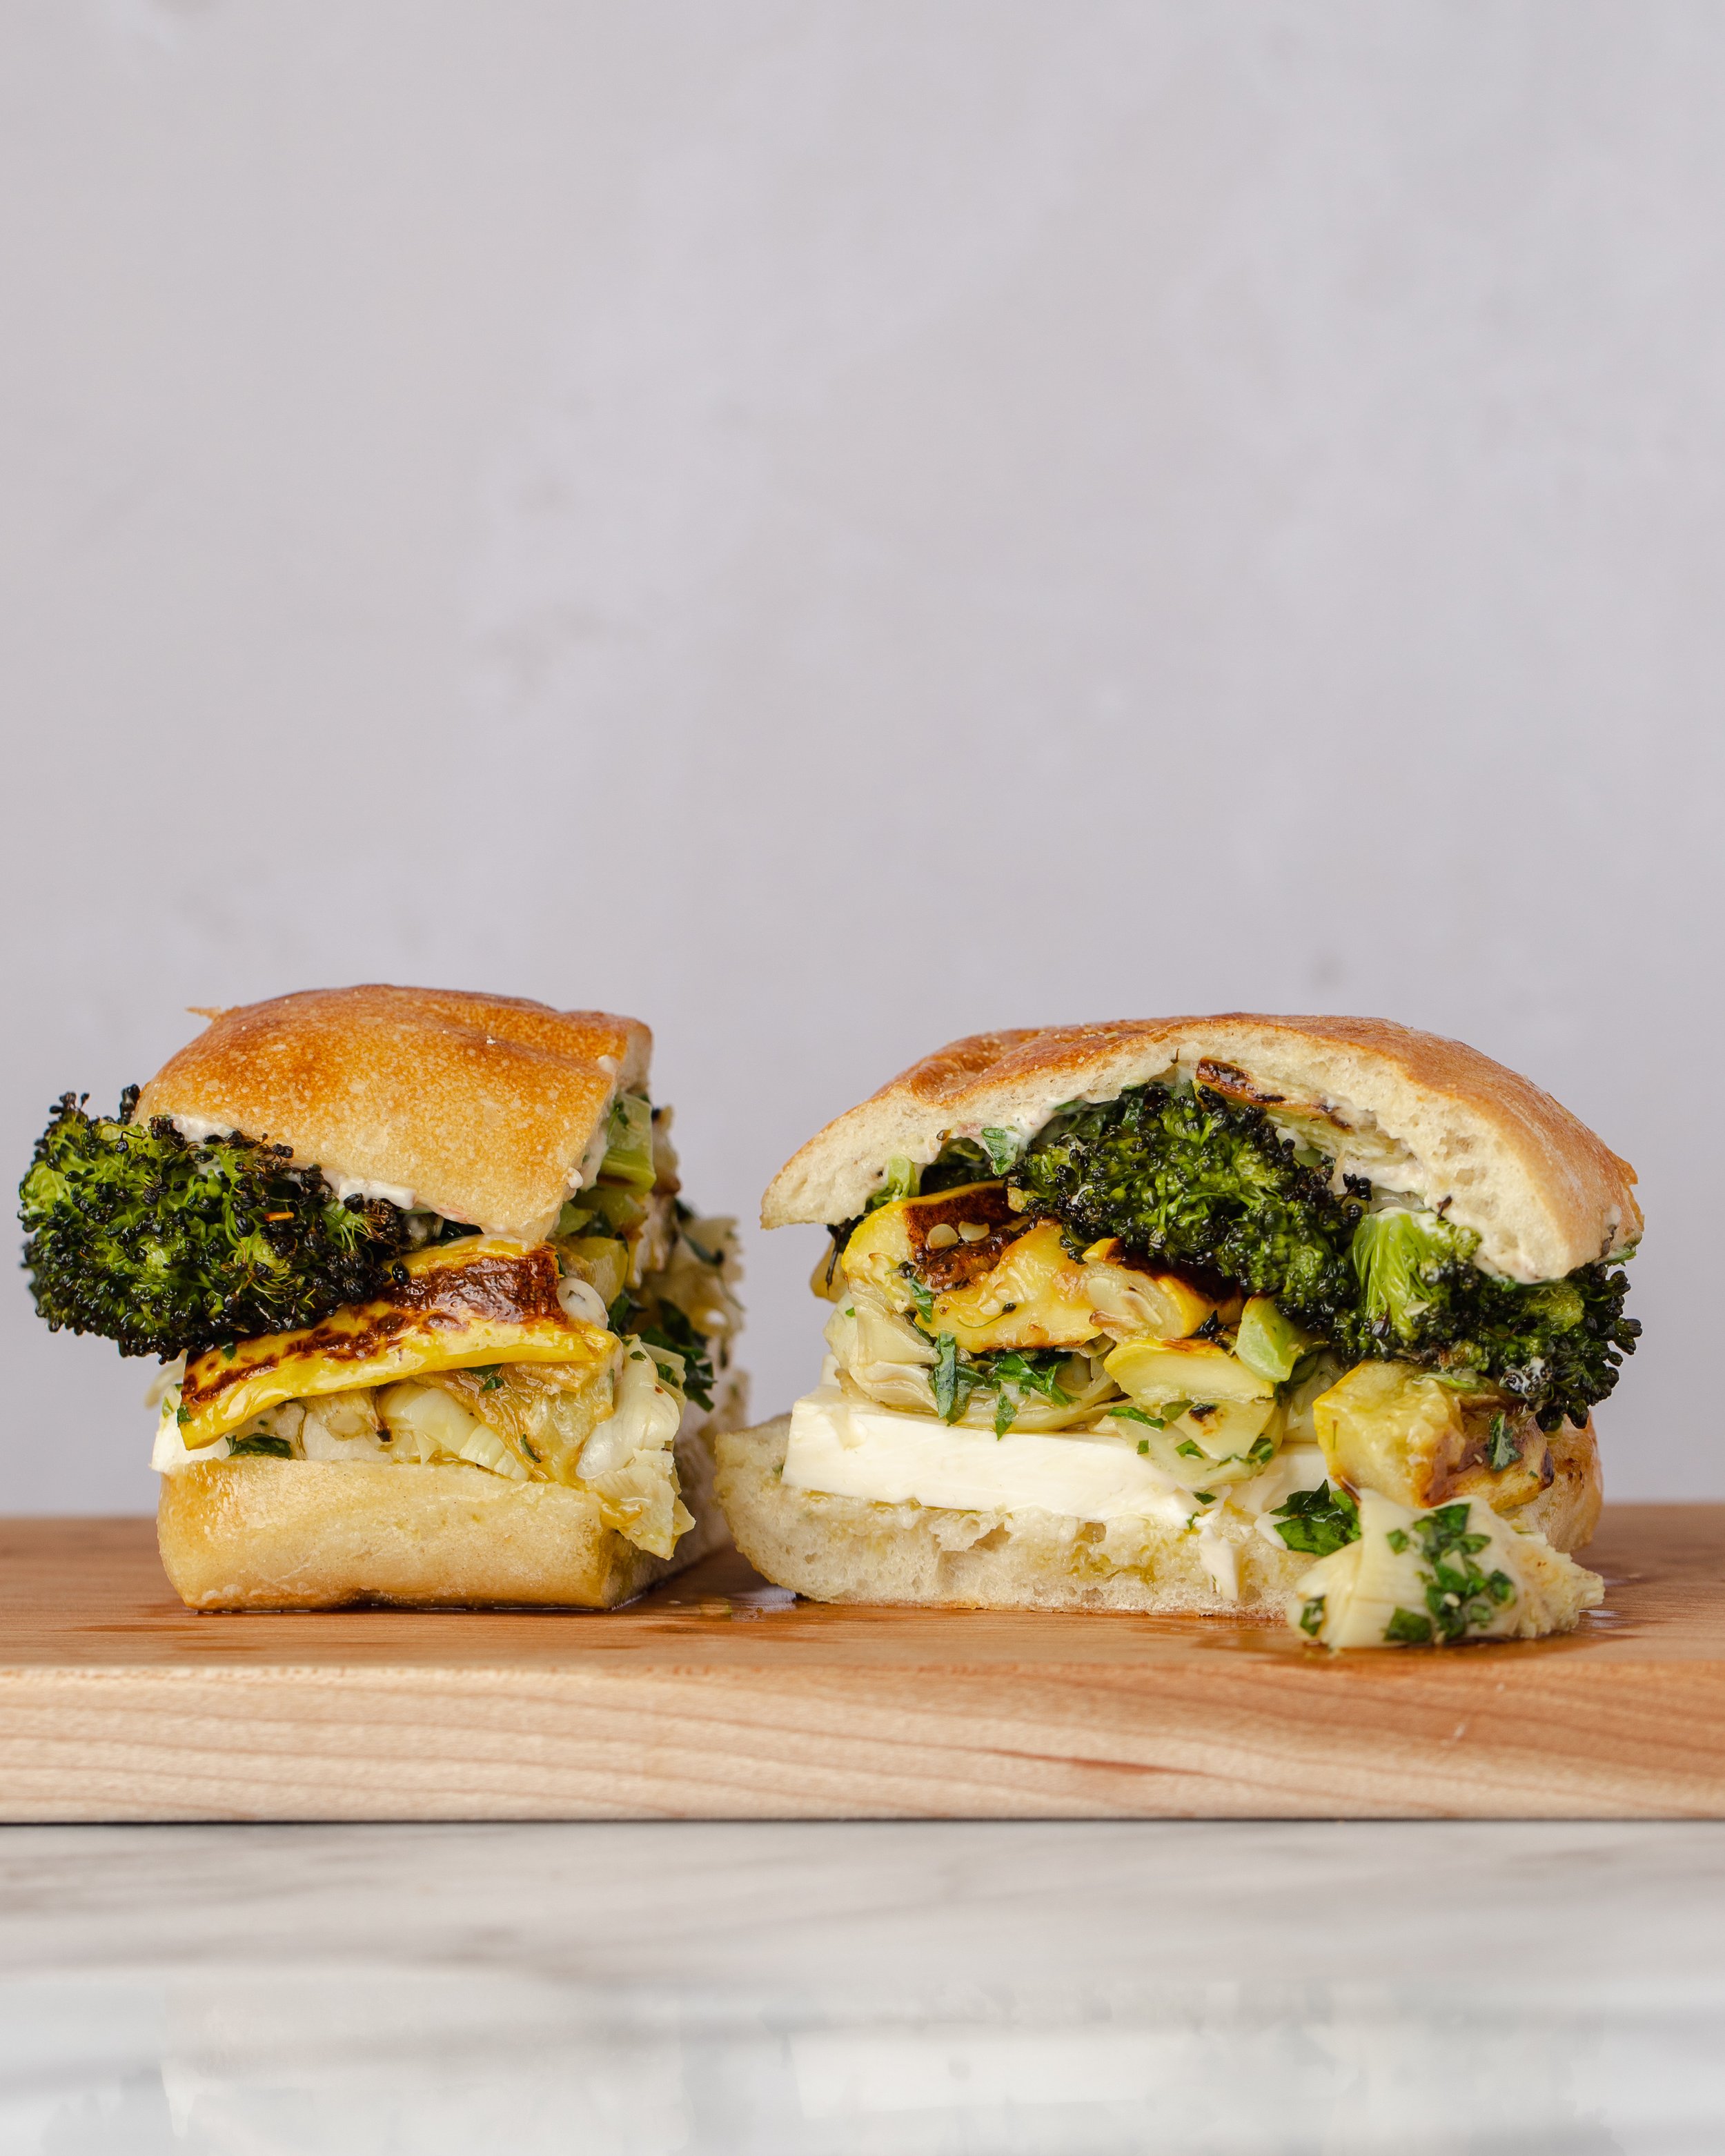 Roasted Broccoli and Summer Squash Sandwich with Artichokes, Feta, and Salsa Verde